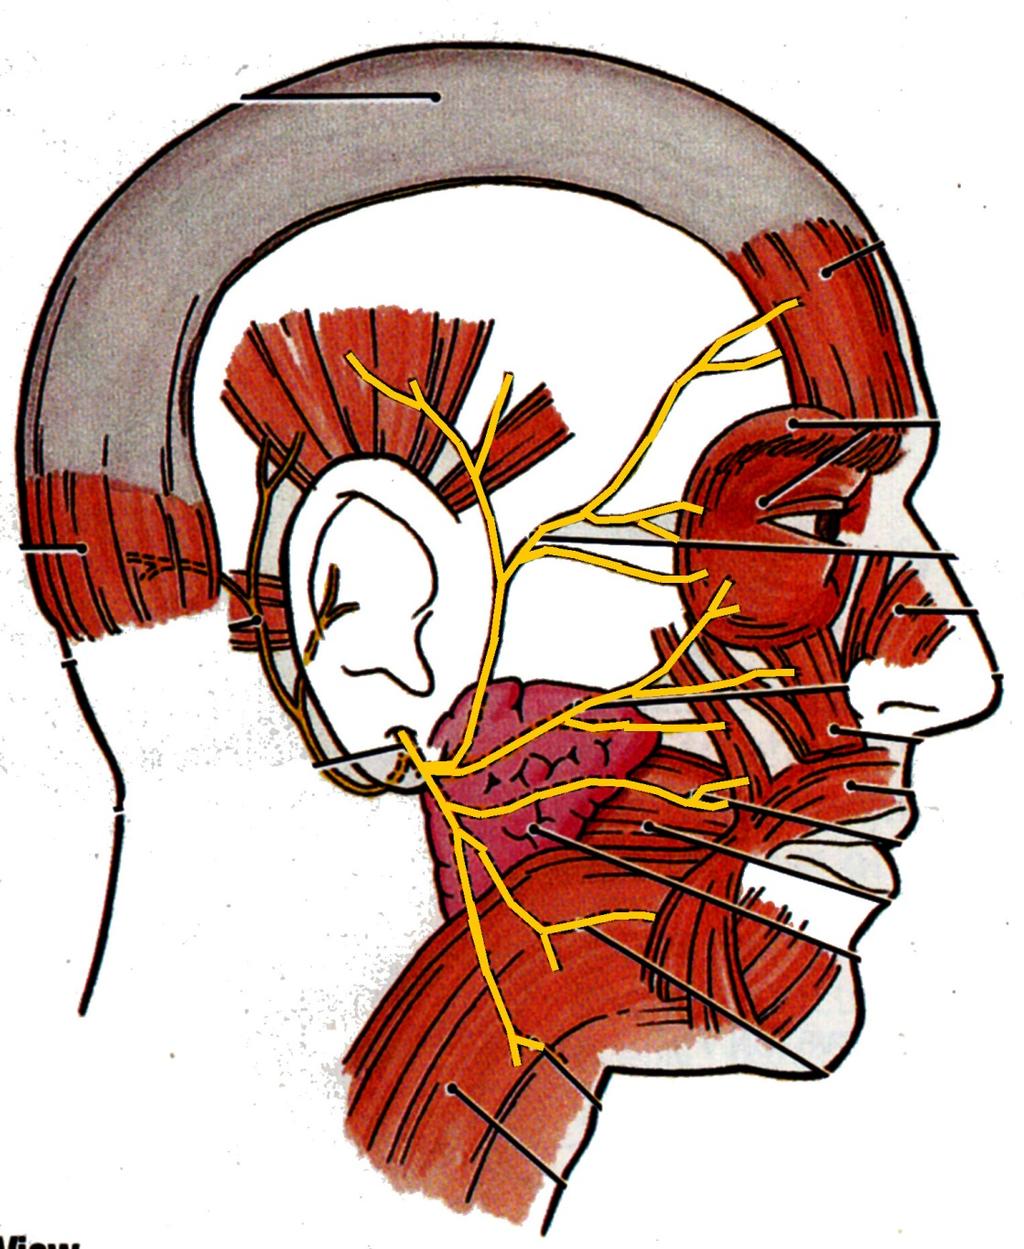 MOTOR INNERVATION TO MUSCLES OF FACIAL EXPRESSION - FACIAL NERVE (CRANIAL NERVE